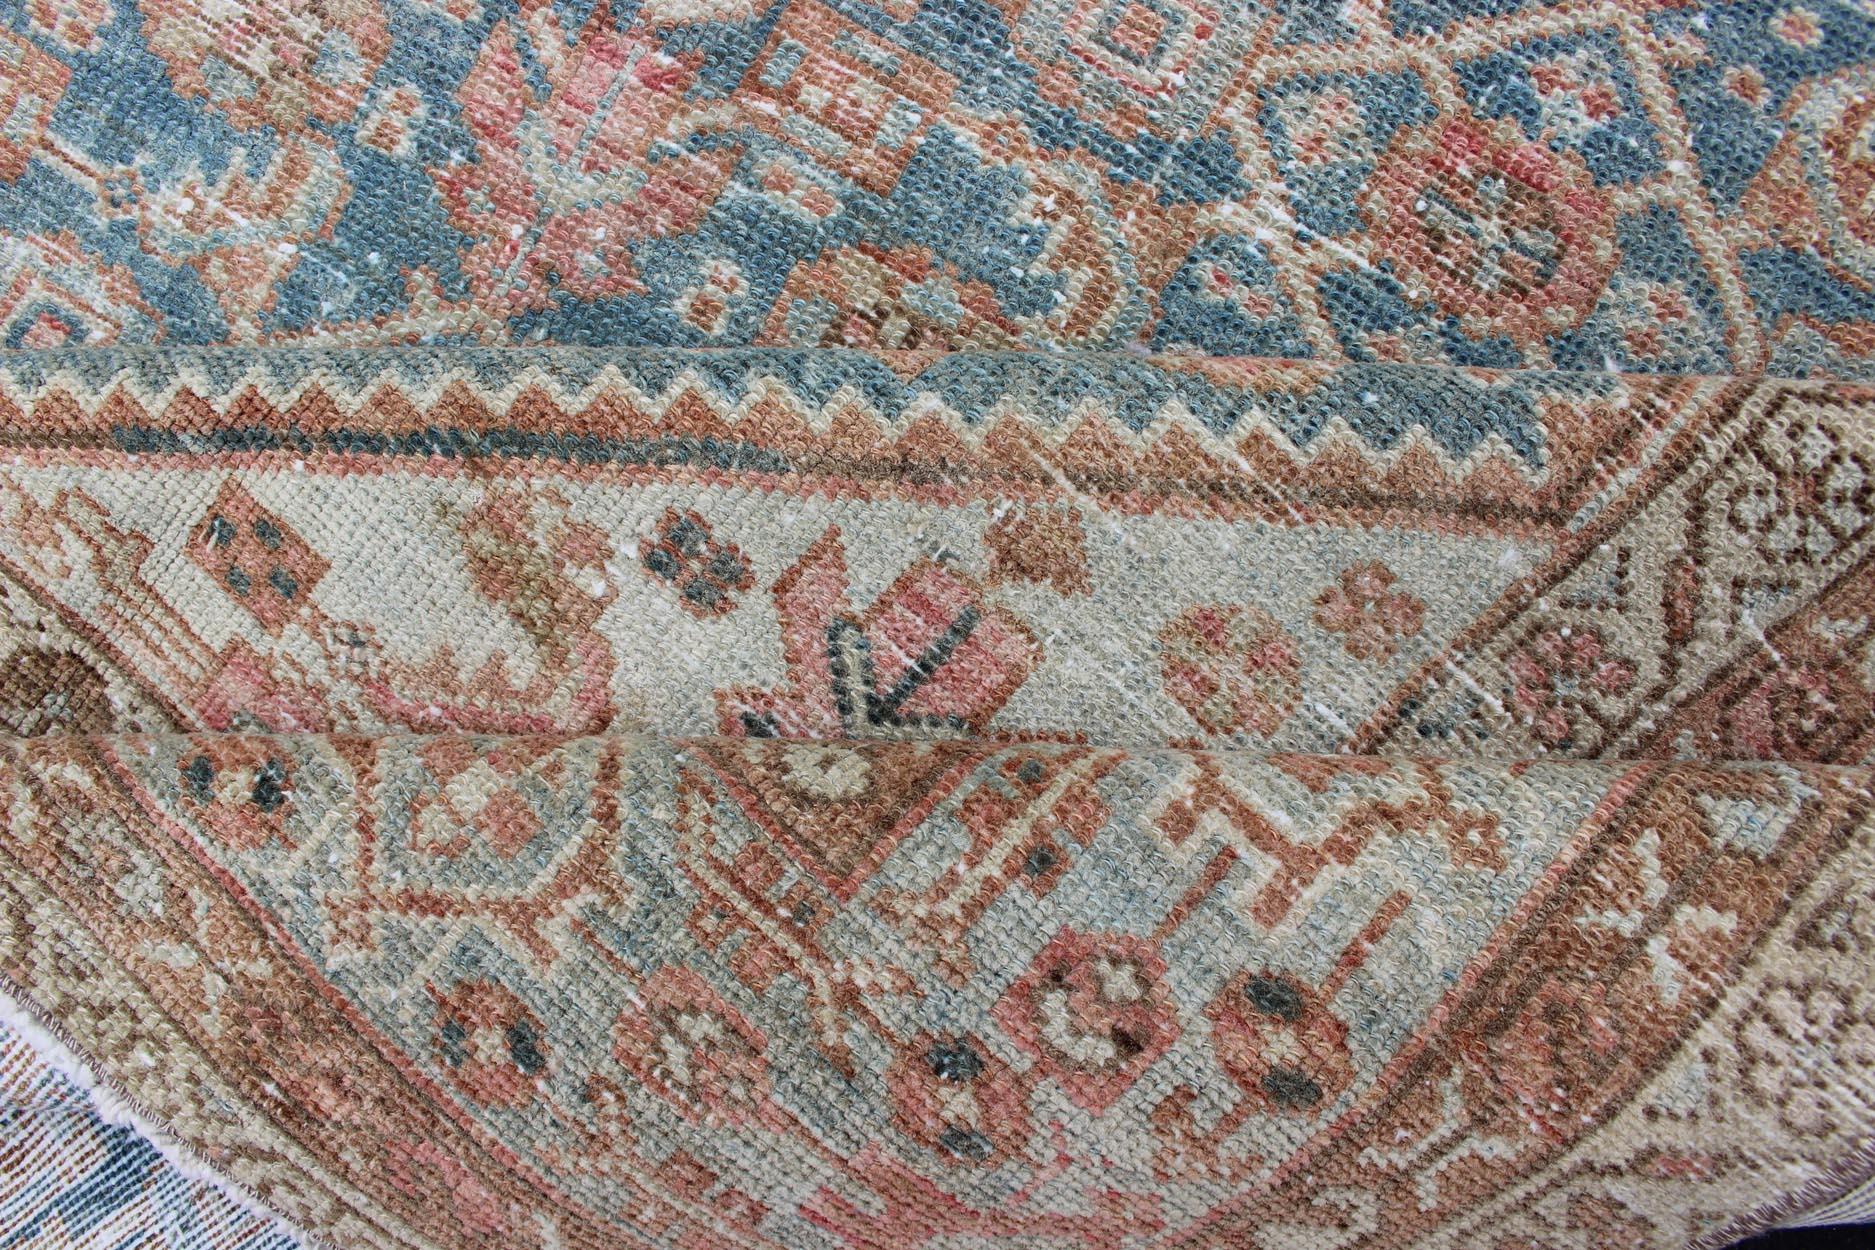 Antique Malayer Carpet with All-Over Design in Blue Gray Tones In Good Condition For Sale In Atlanta, GA